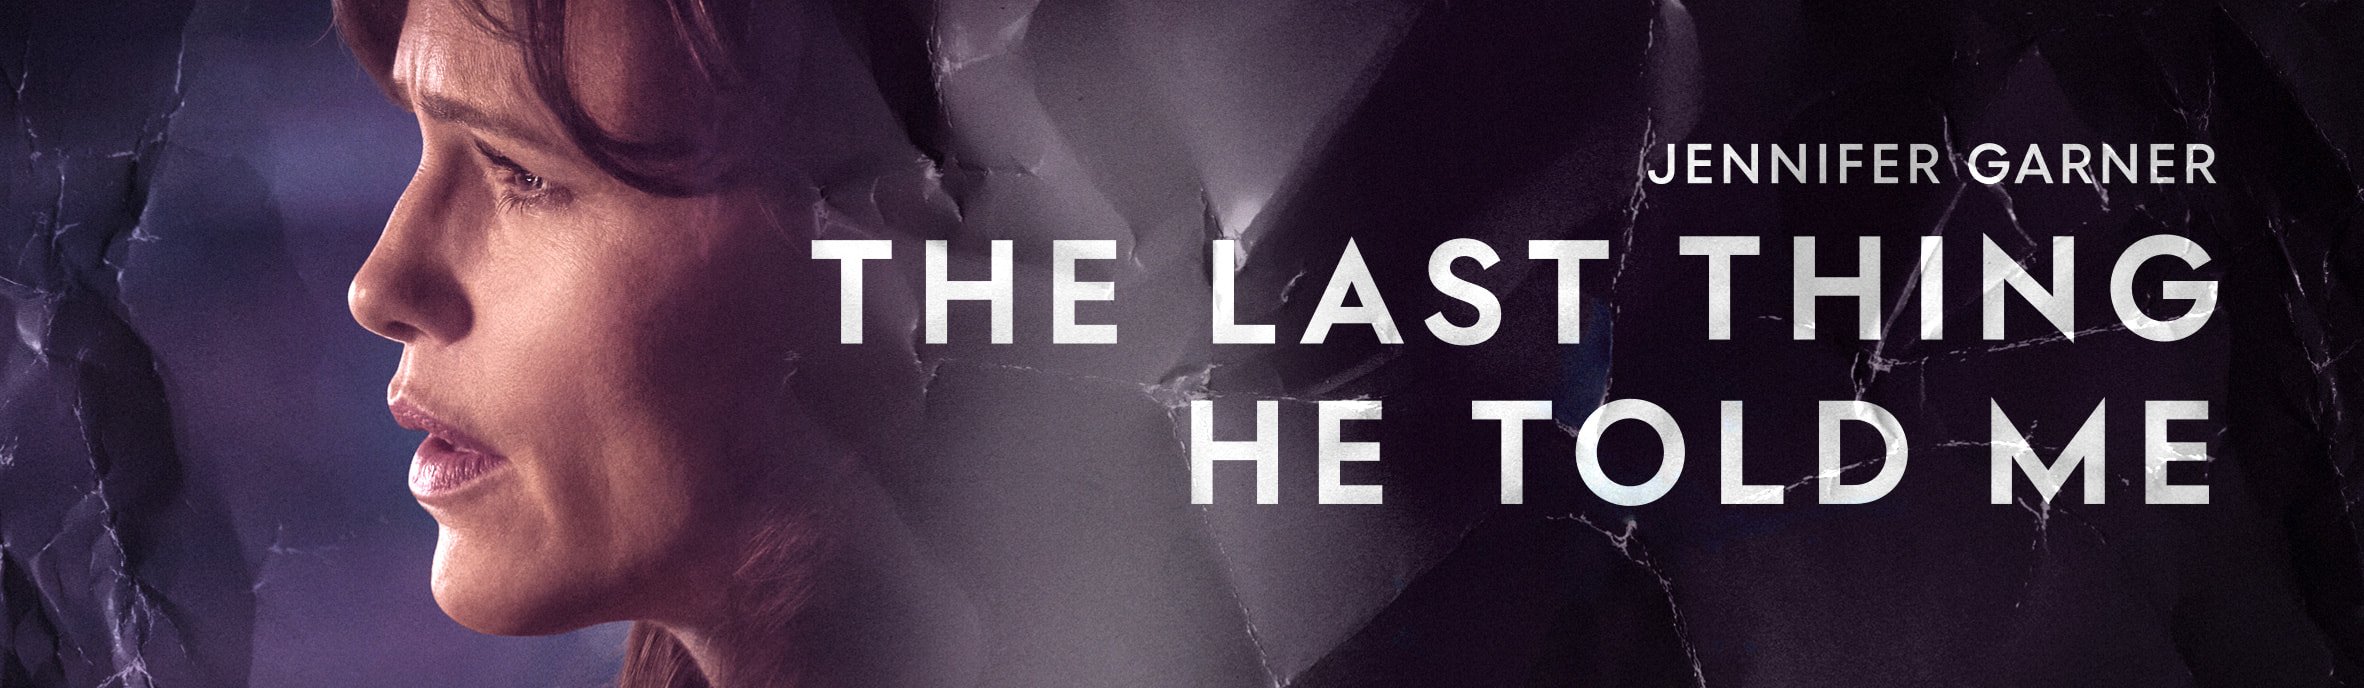 The Last Thing He Told Me' premiere: How to watch and where to stream 